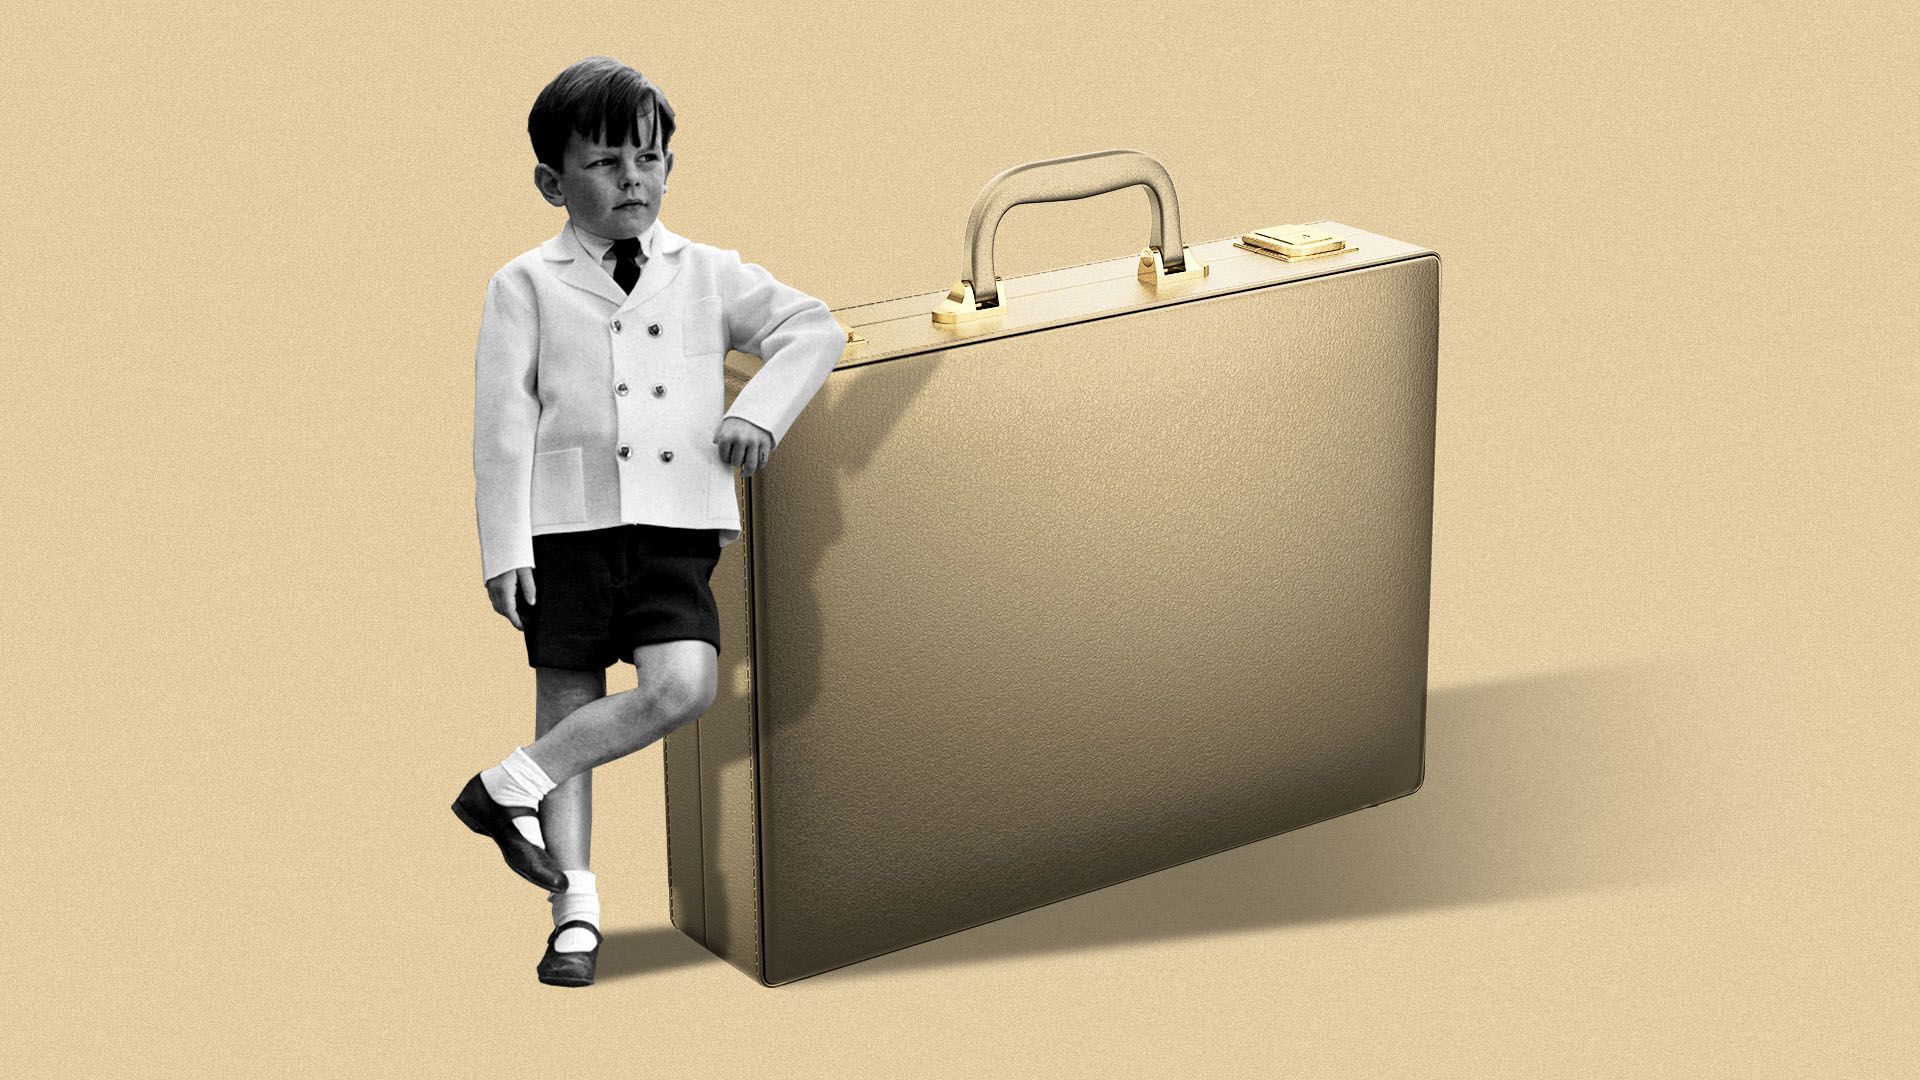 Illustration of an archival image of a boy in fancy clothes leaning up against a giant suitcase